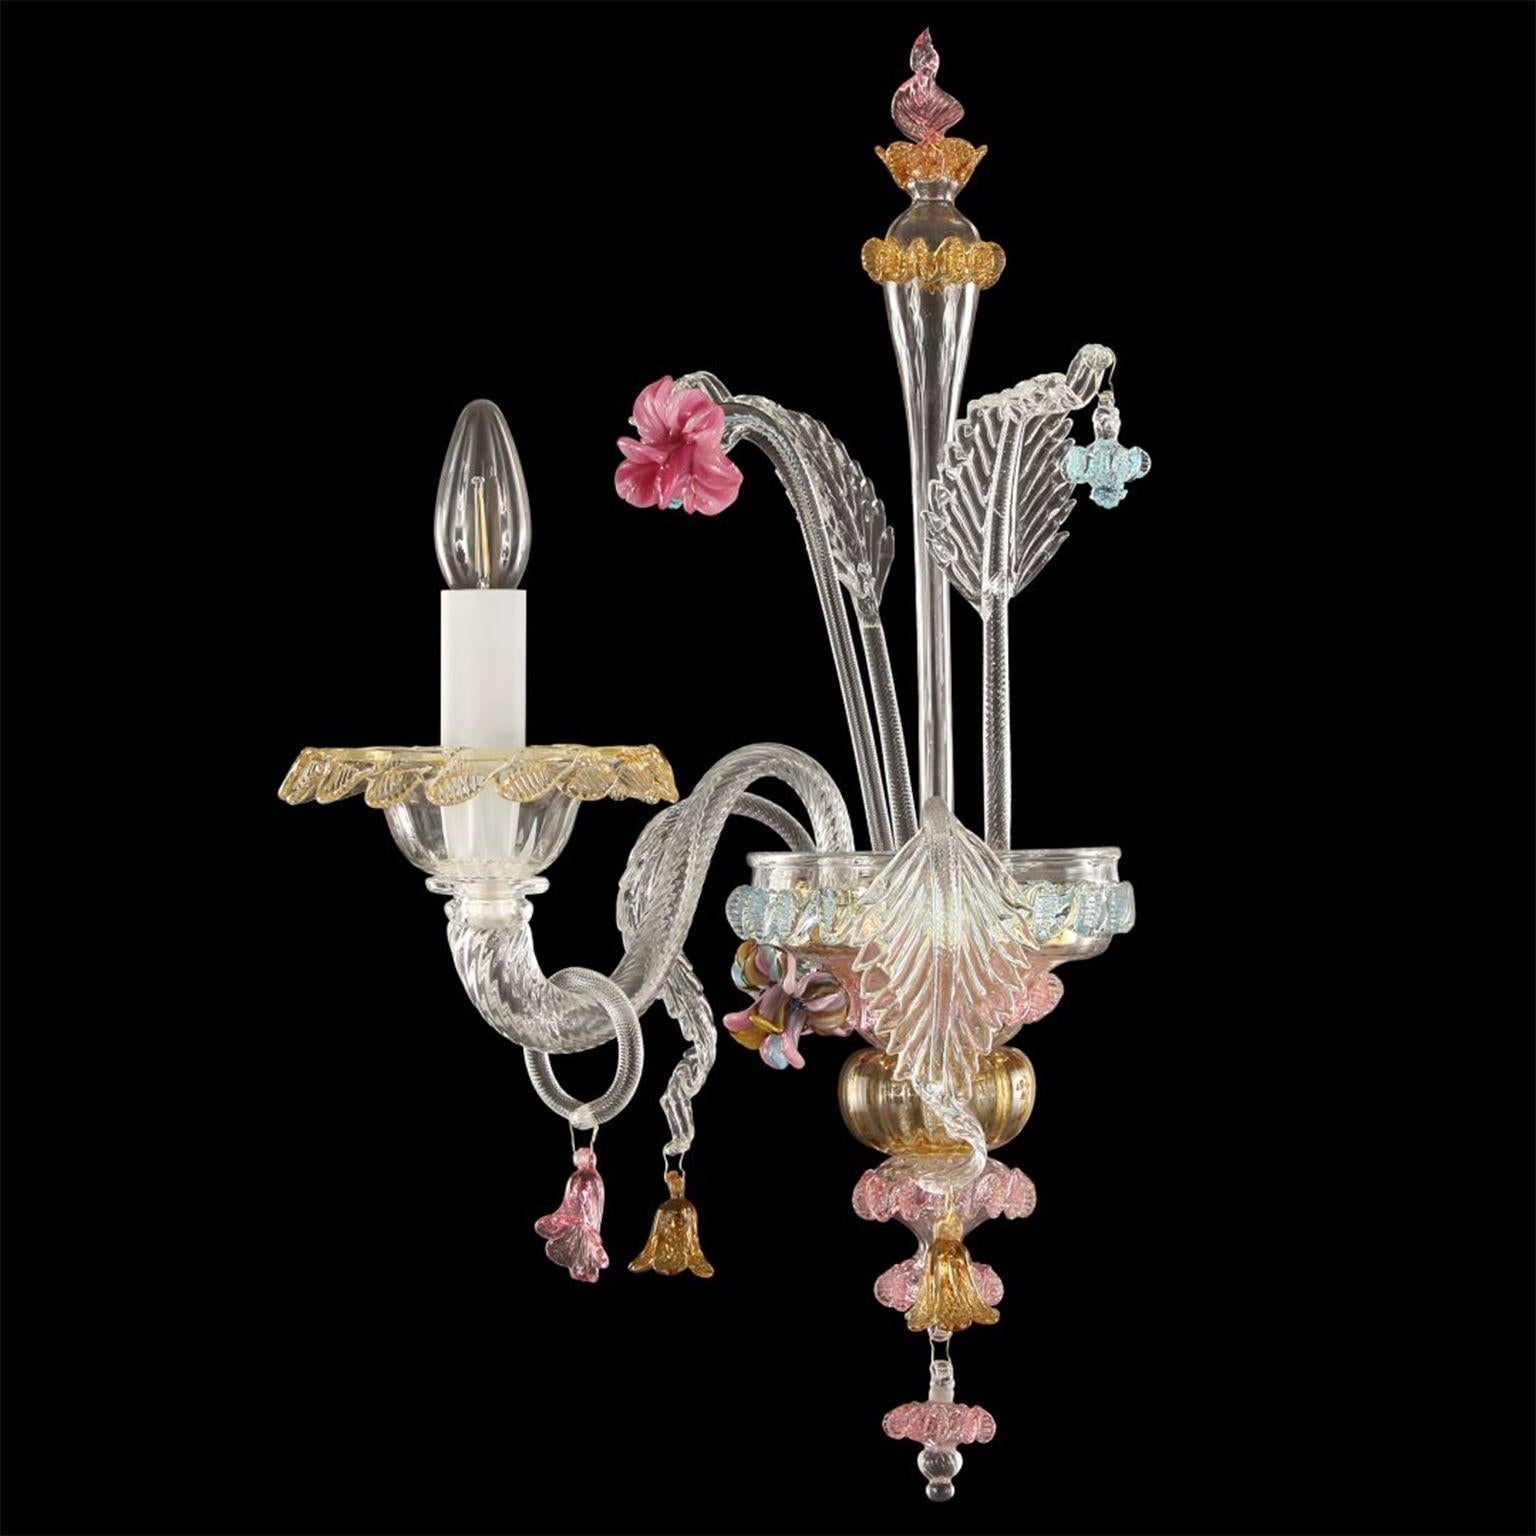 Toffee sconce 1 arm clear Murano glass and multicolor detaiils by Multiforme.

The artistic glass collection Toffee is an elegant and delicate lighting work. The structure is a combination of well-proportioned volumes that creates a refined